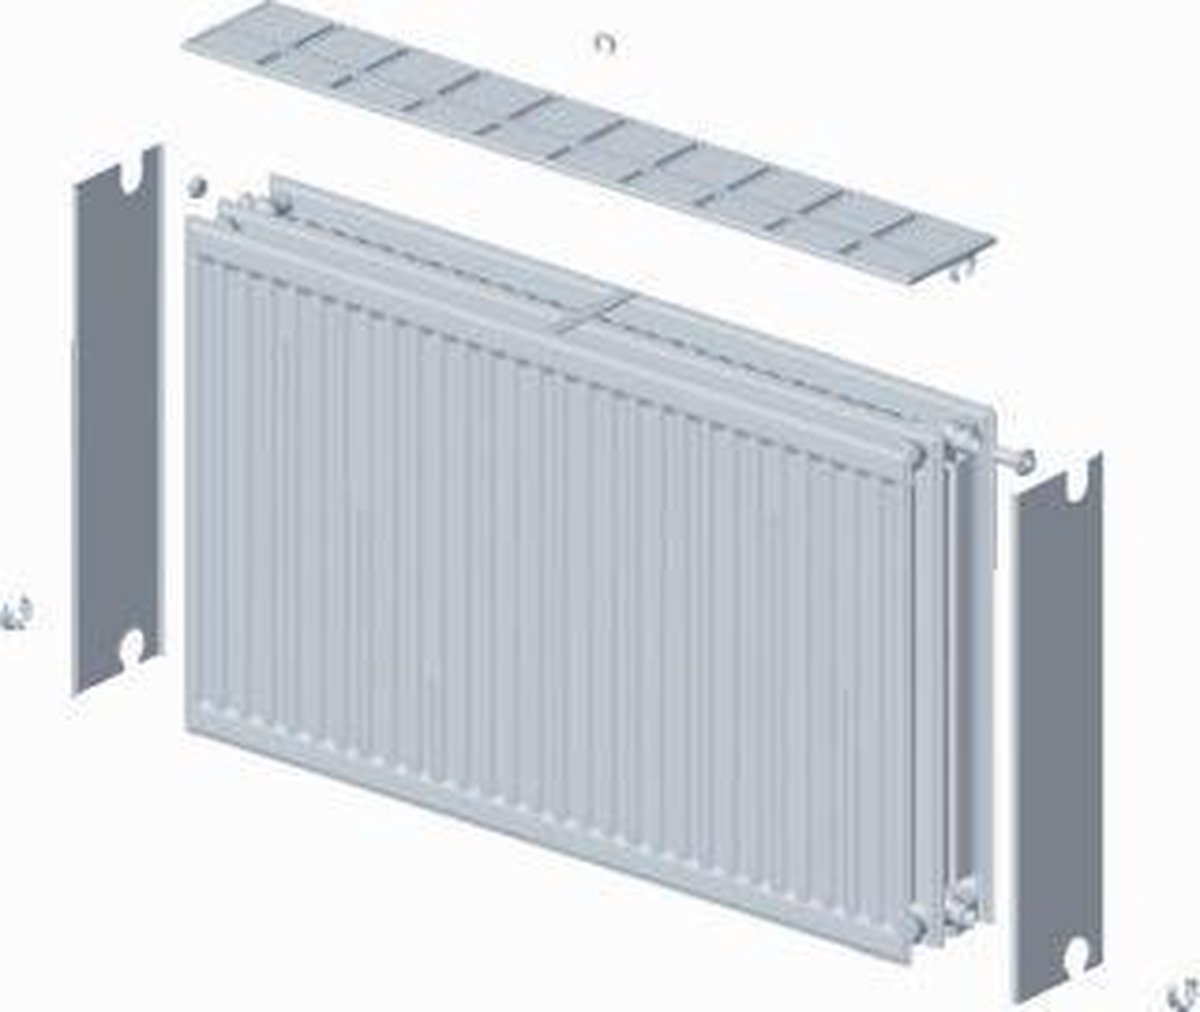 Stelrad paneelradiator Novello, staal, wit, (hxlxd) 300x1400x158mm, 33